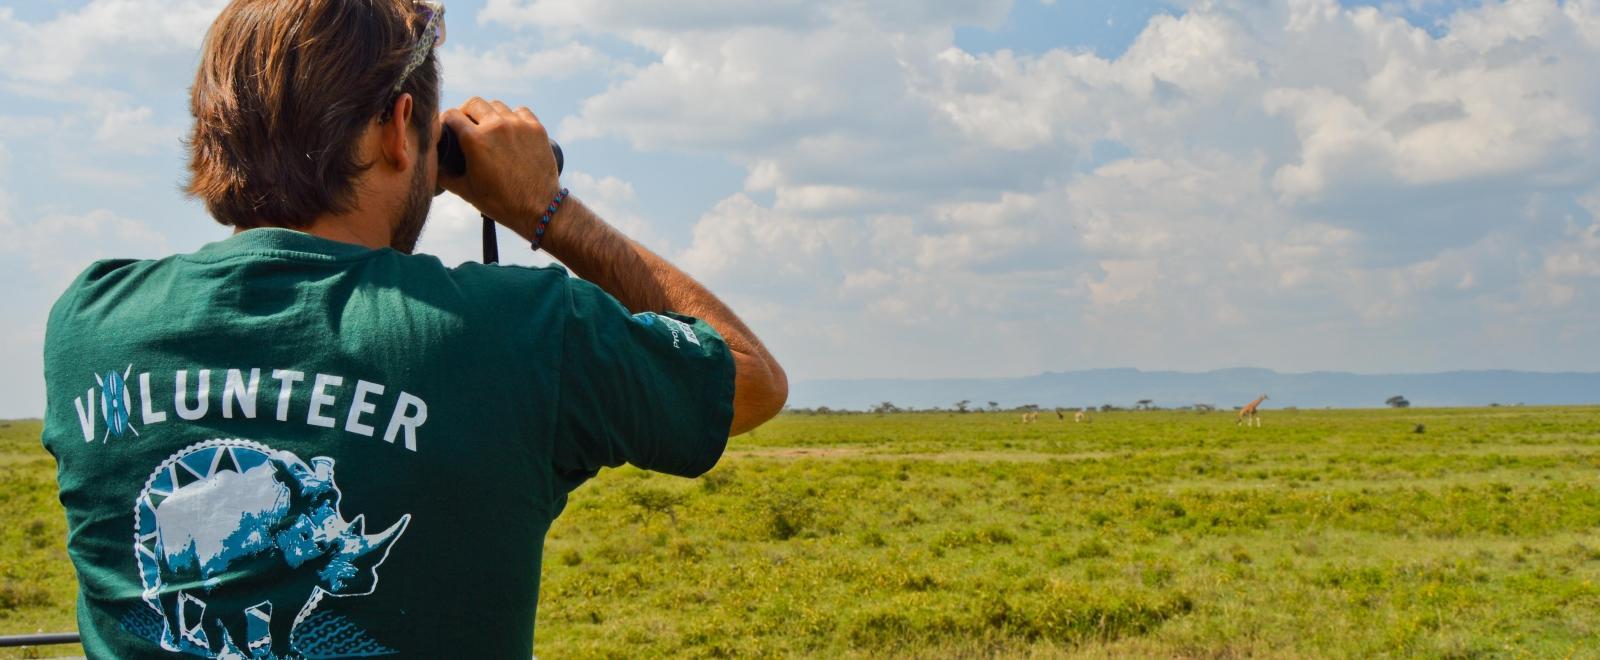 A man conducting a wildlife census as part of Projects Abroad's conservation volunteer work abroad.